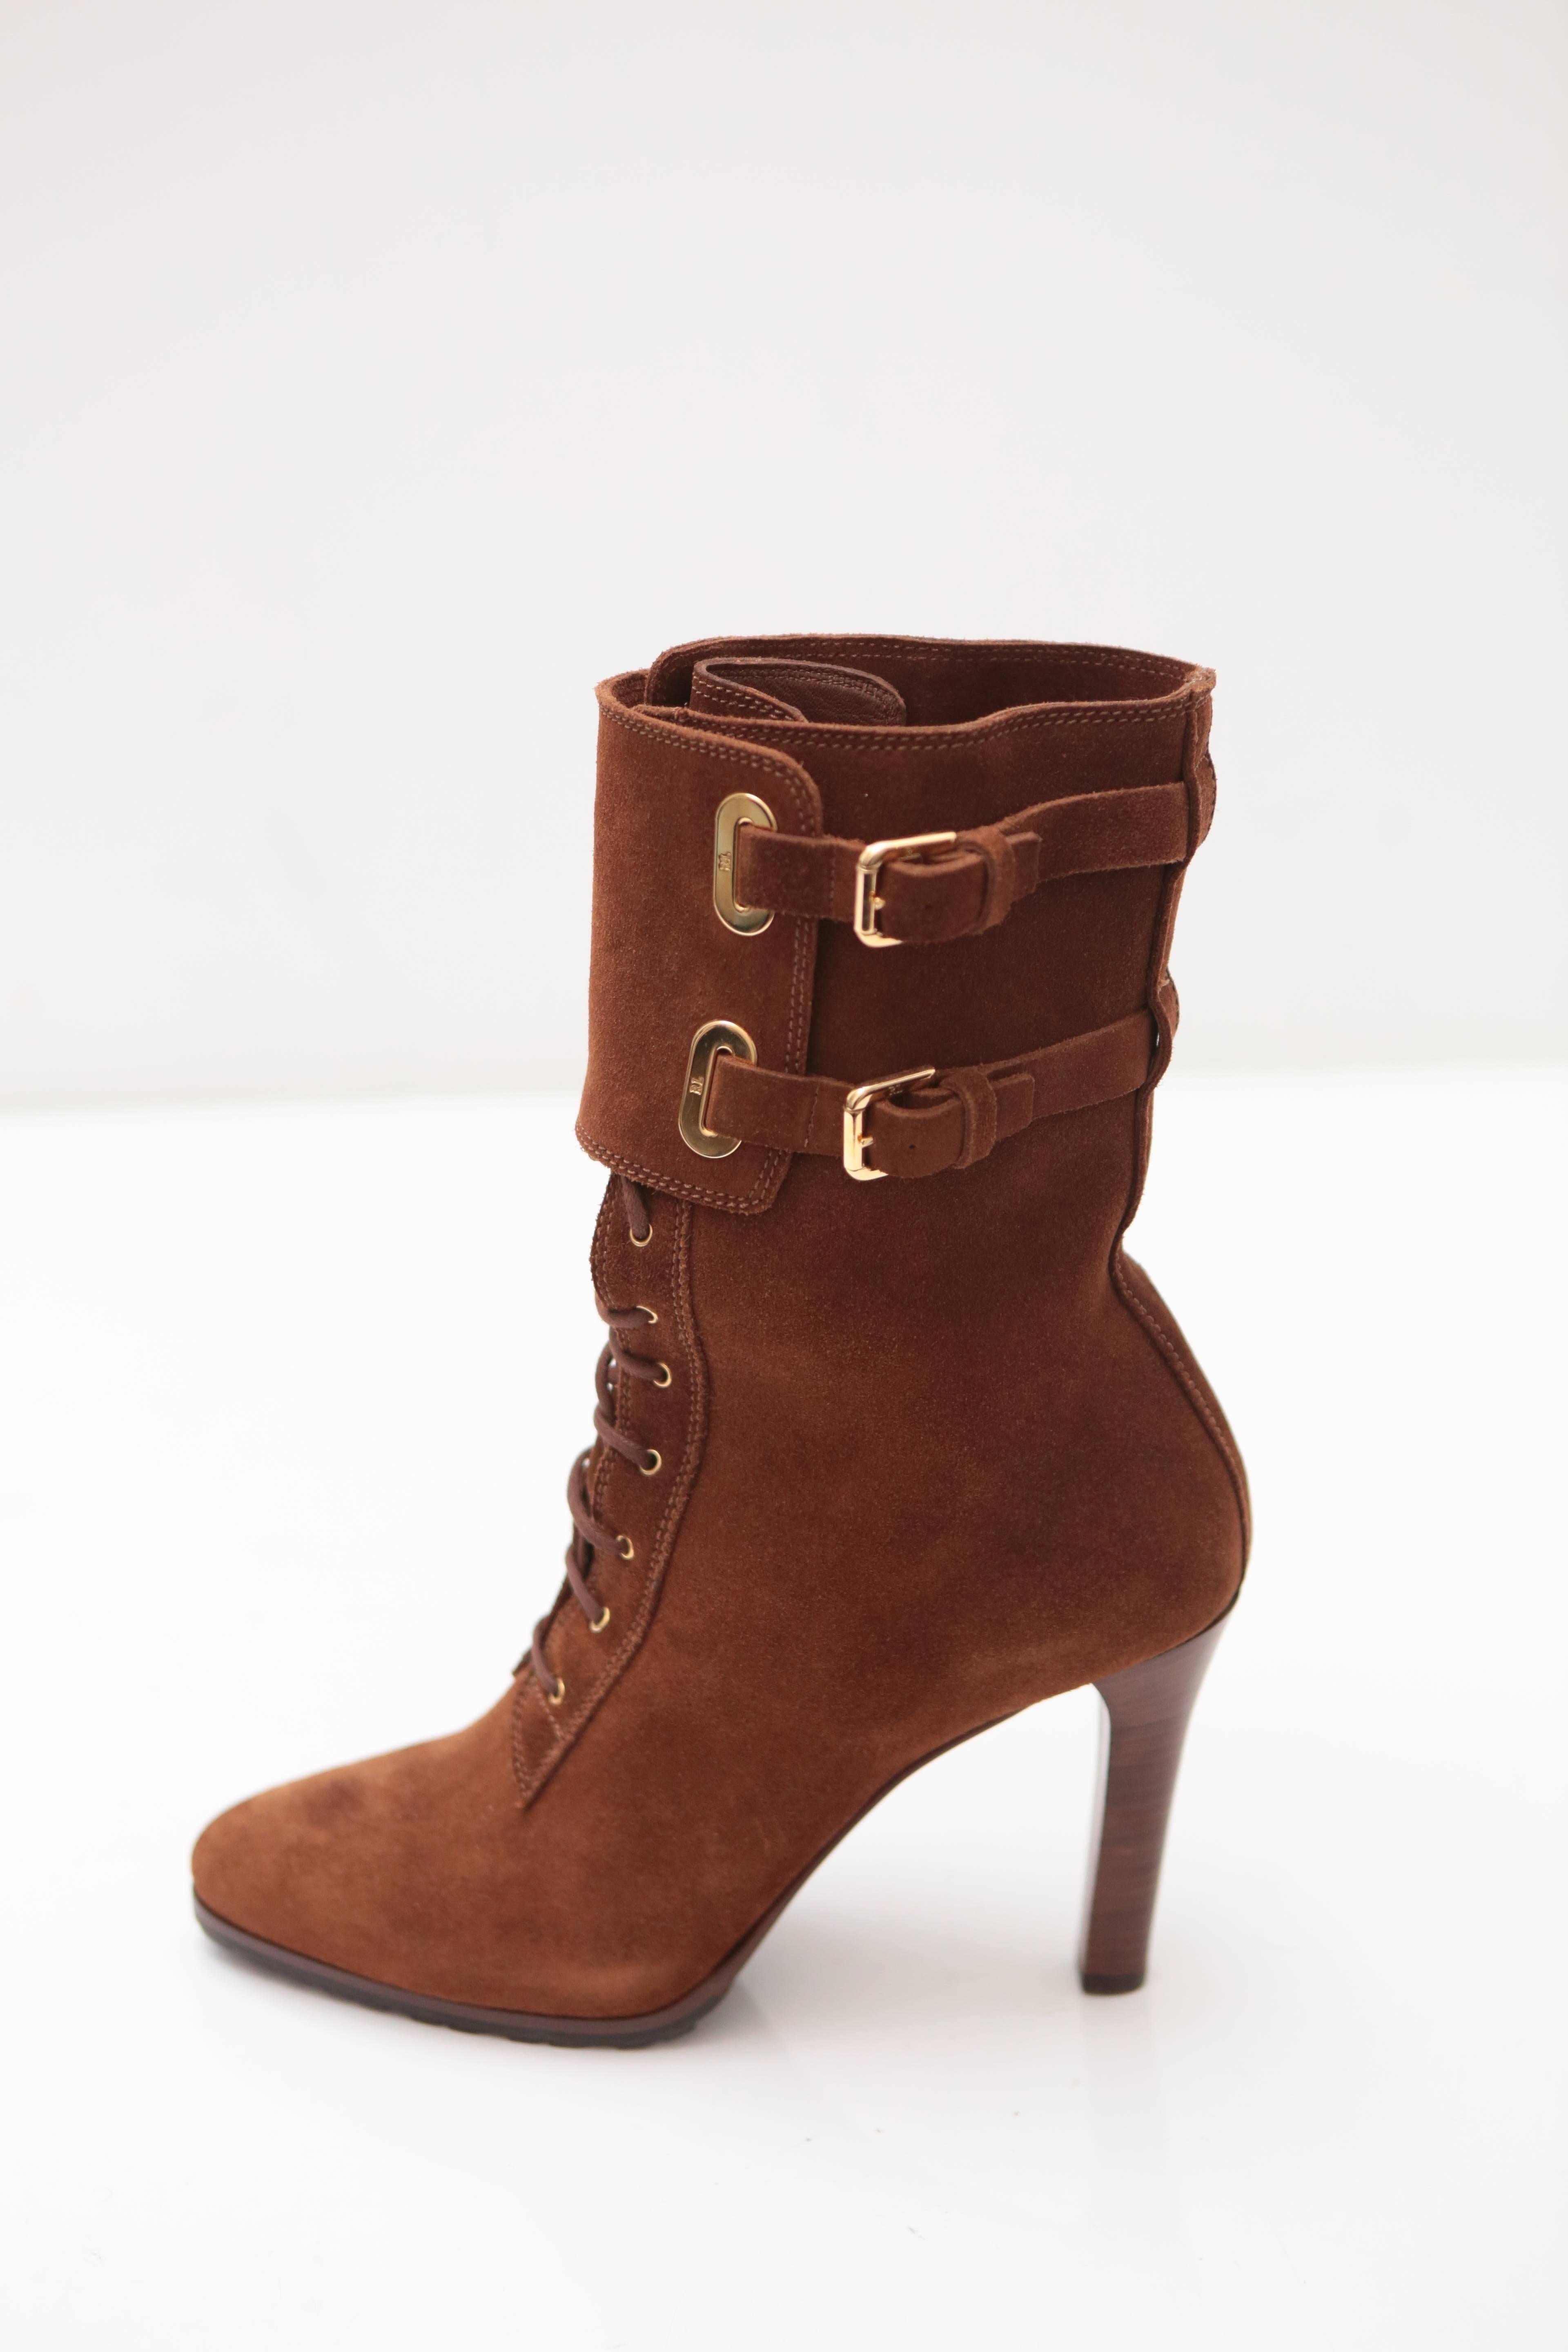 Double Buckle Cuff overlay with Gold Hardware adorns this lace-up suede ankle boot with rubber sole on stacked heel. The perfect cozy feel for a winter boot from Ralph Lauren.